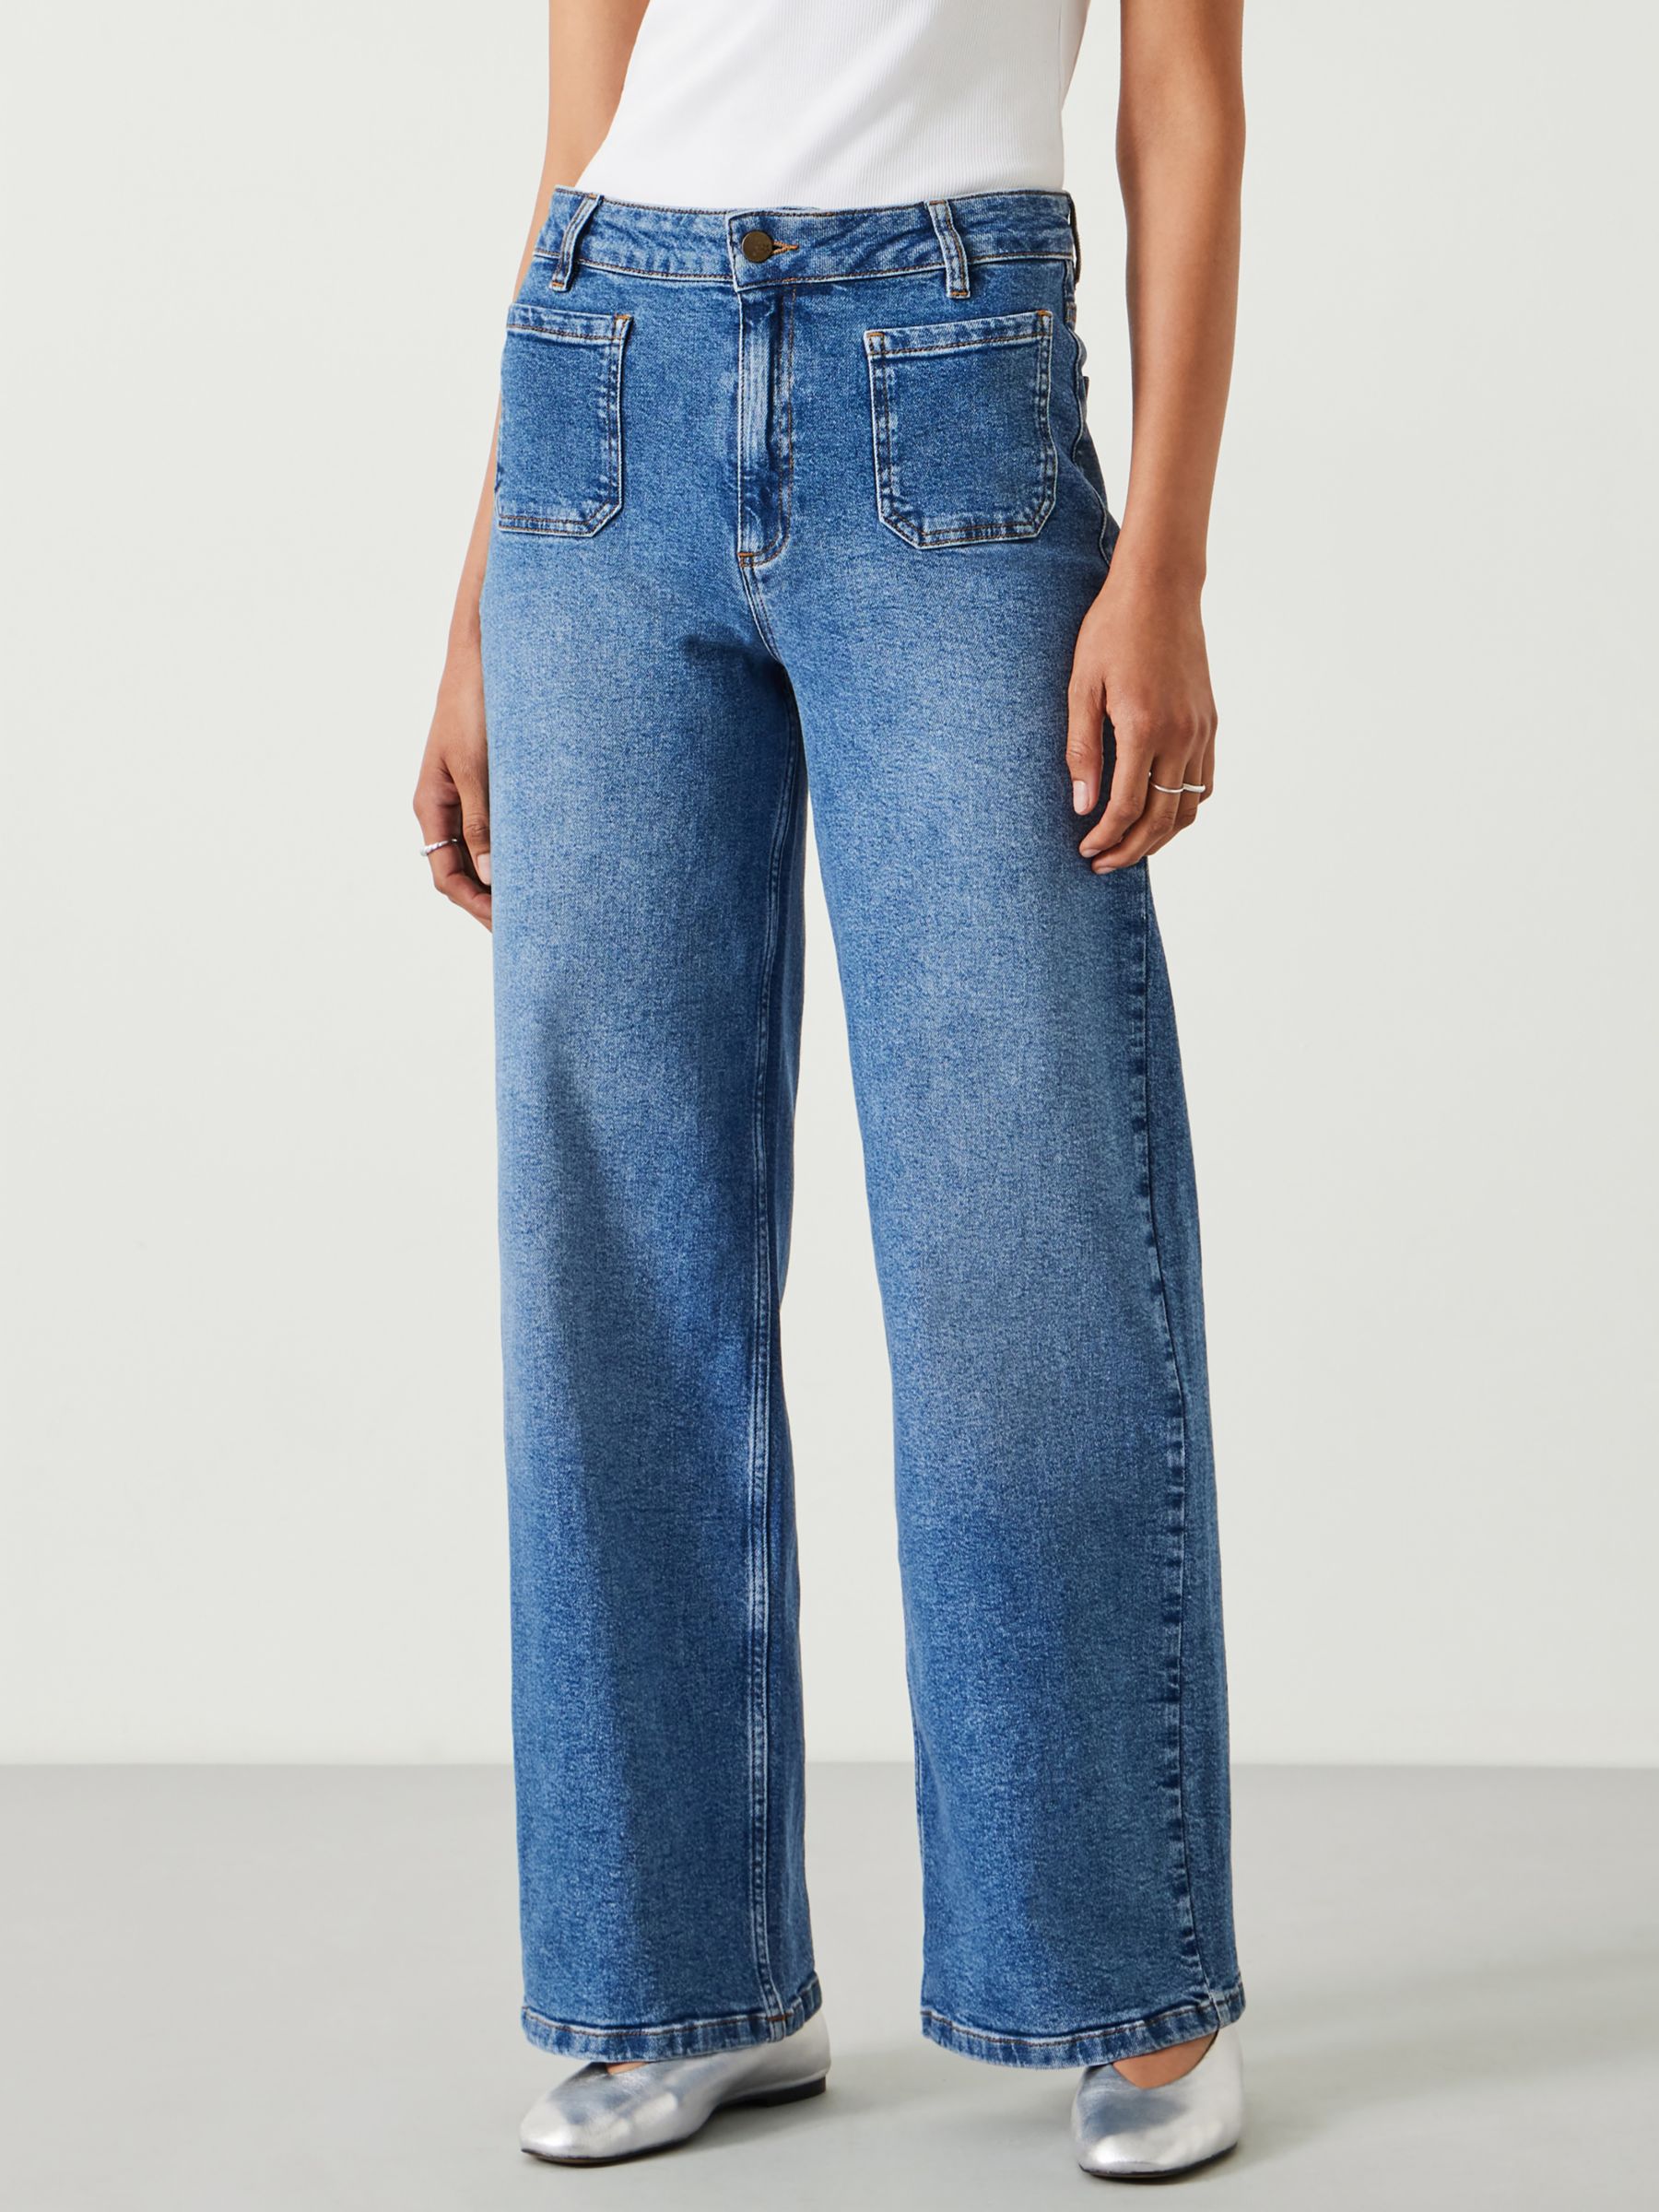 HUSH Rowan Flared Jeans, Mid Authentic Wash at John Lewis & Partners